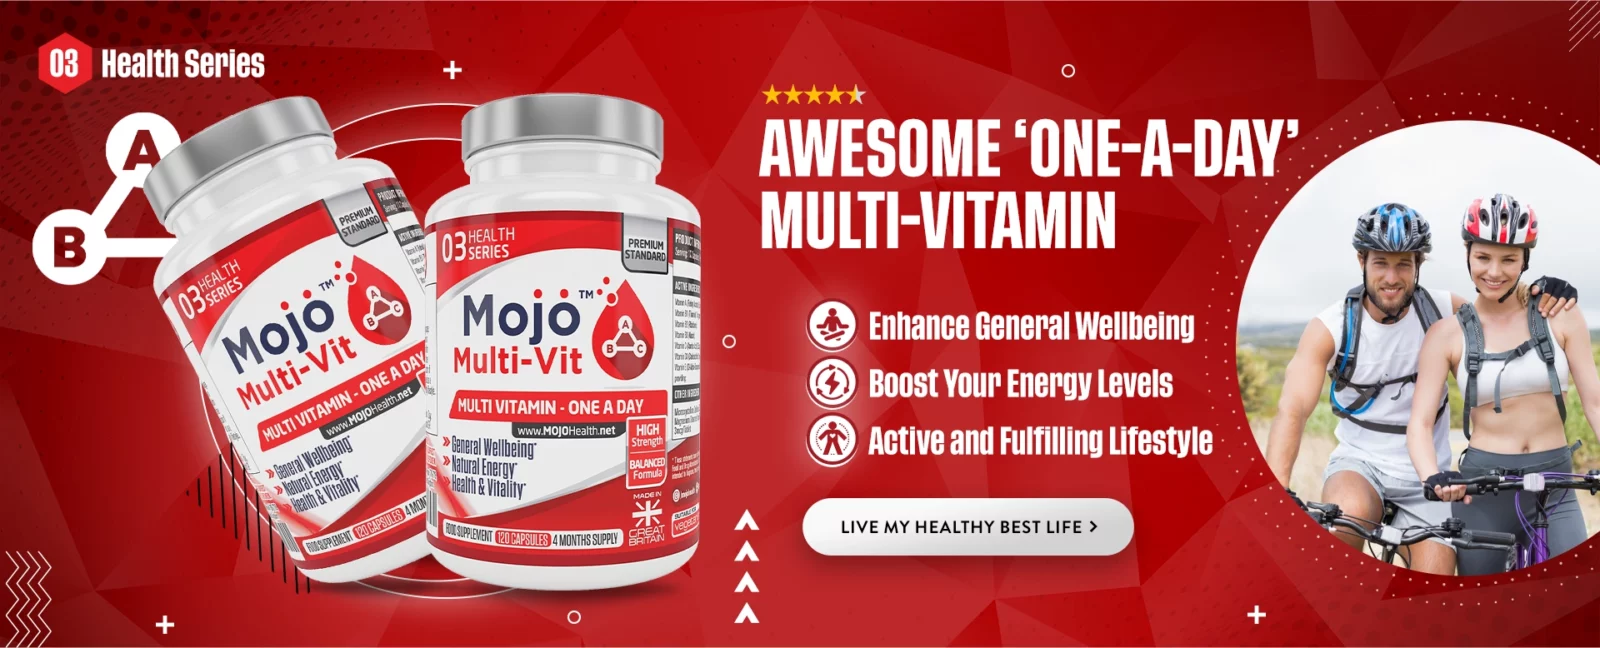 MOJO Multi Vitamins Vitamin One A Day Mineral Methylated Complex Best UK Supplements